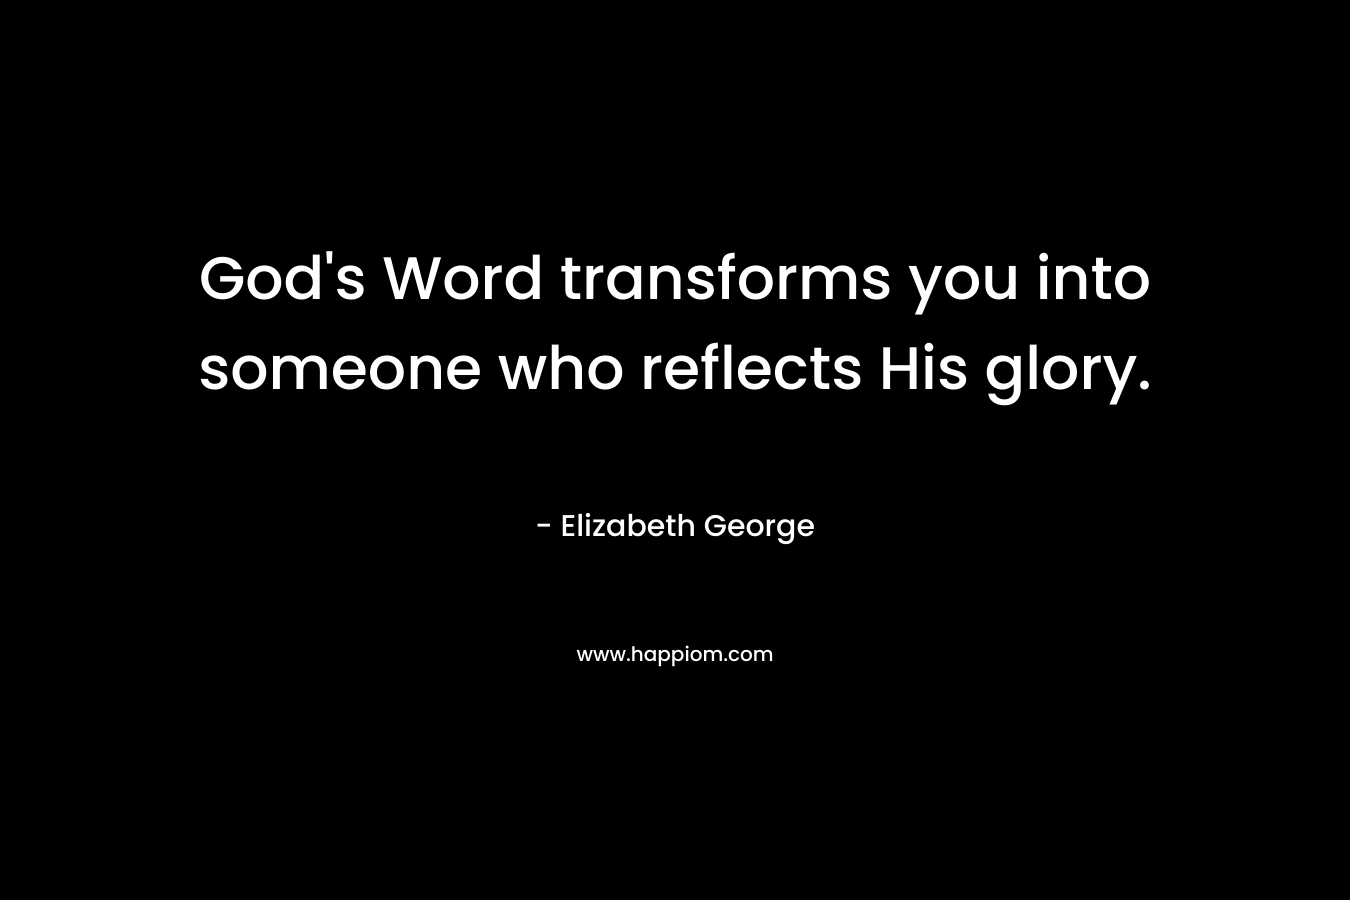 God’s Word transforms you into someone who reflects His glory. – Elizabeth George